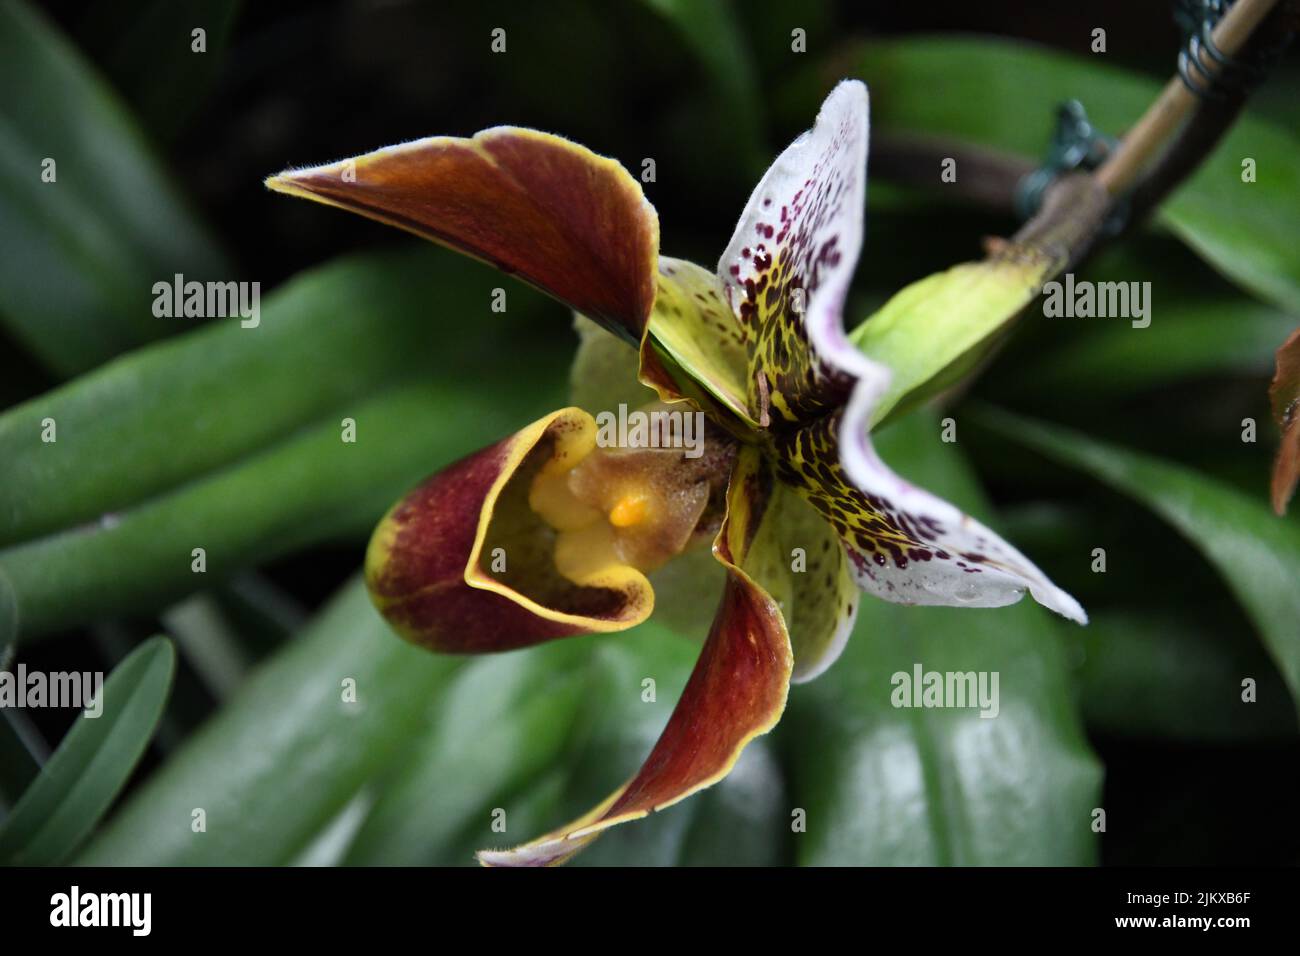 A closeup shot of a Venus Slipper flower in a garden surrounded by green leaves Stock Photo